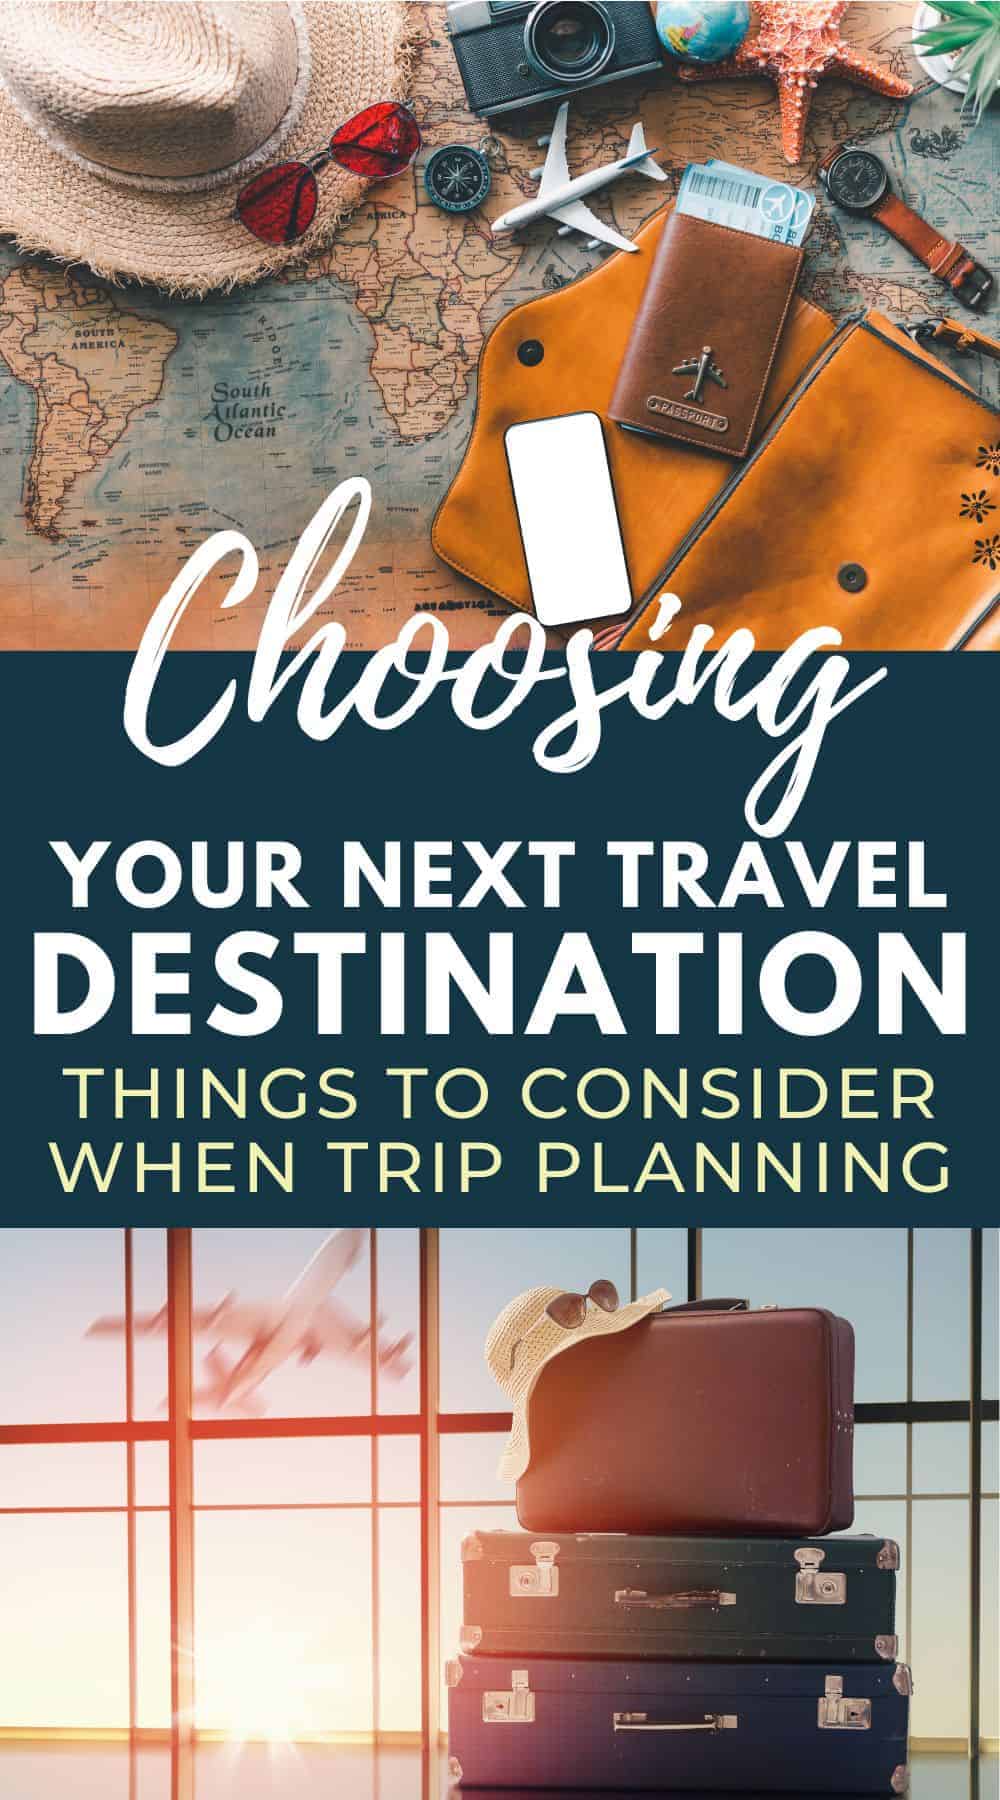 Pinterest image with two photos, one of a stack of suitcases in front of a large window and the other showing various travel accessories and paraphernalia on a paper map. The text overlay says, "Choosing your next travel destination. Things to consider when trip planning."